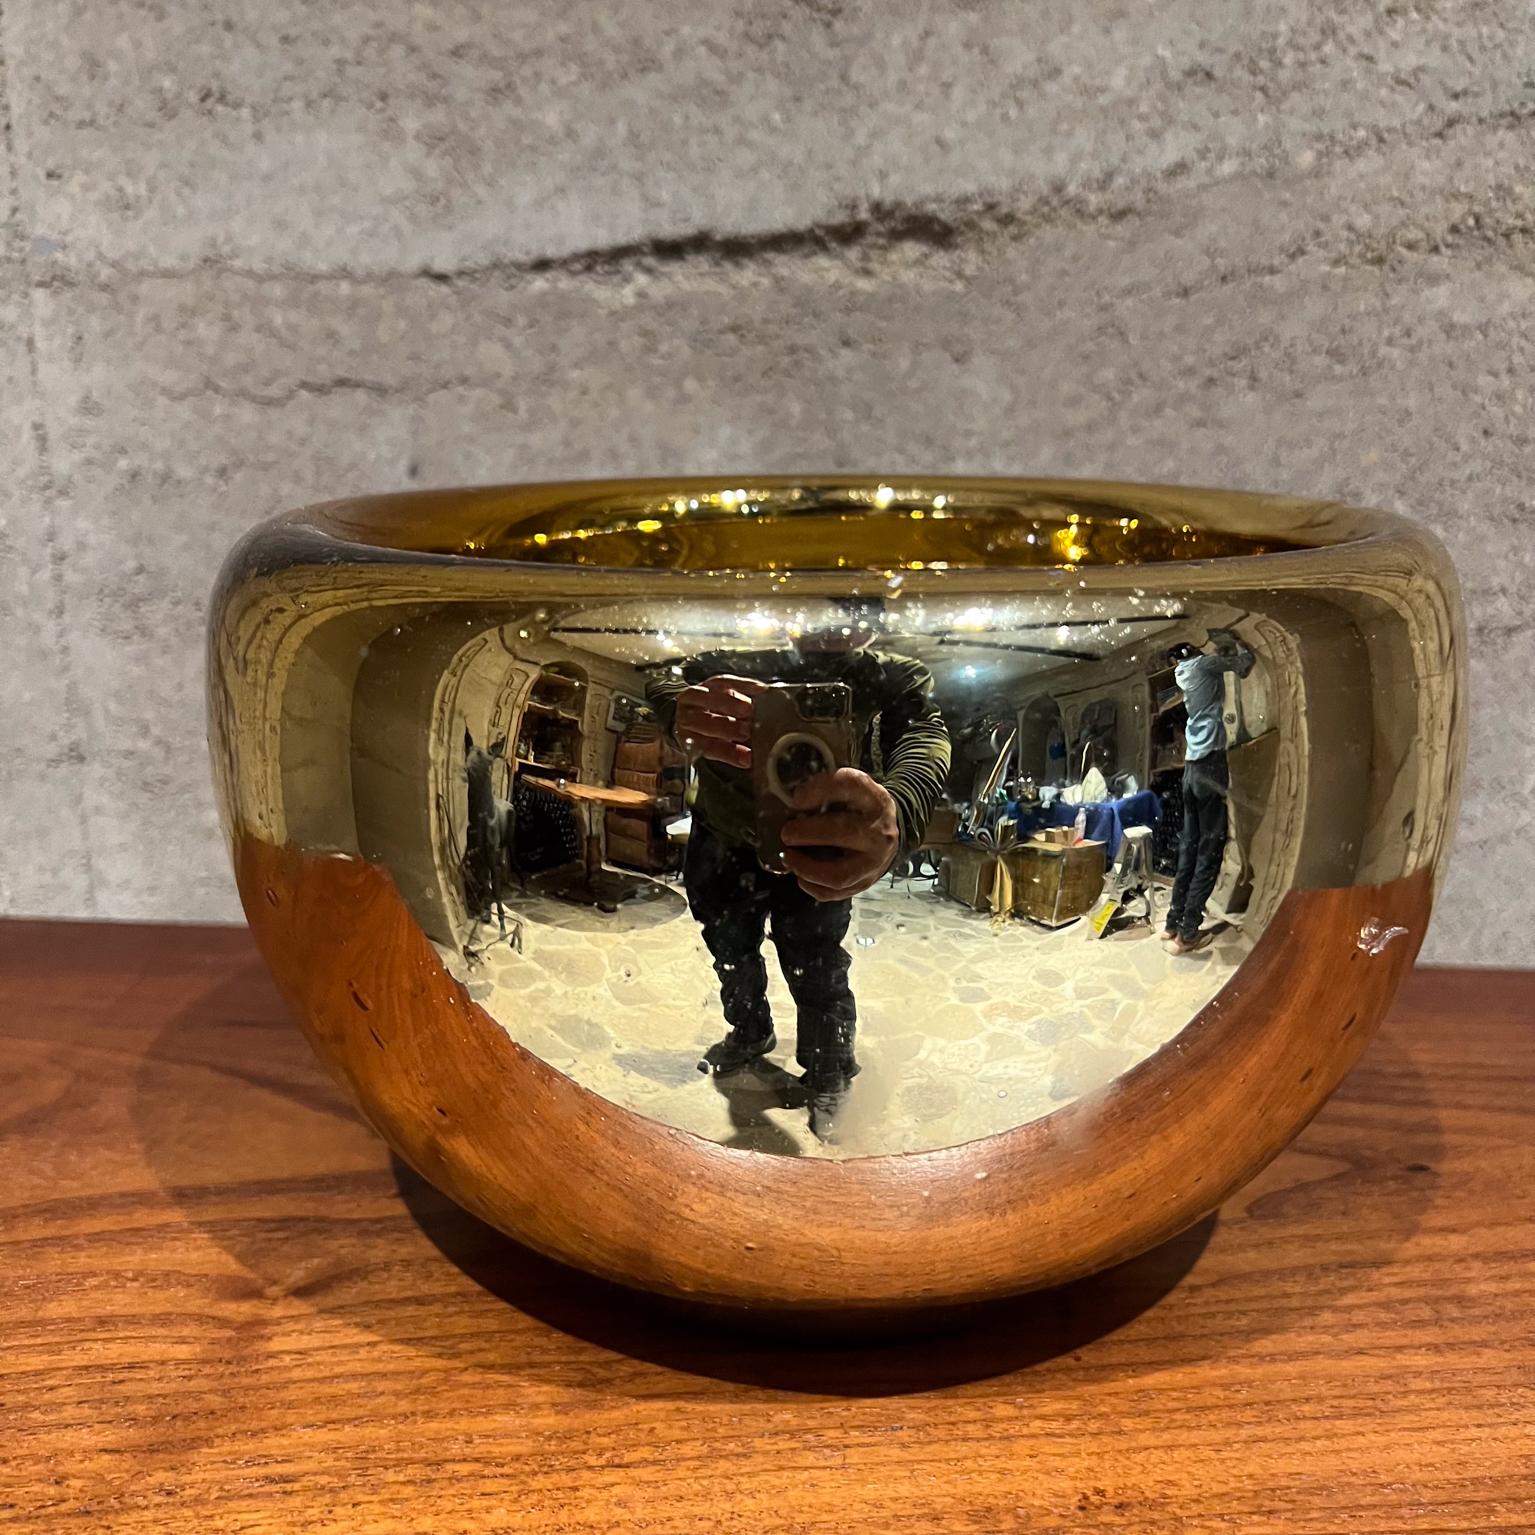 AMBIANIC presents
1950s Hand-blown Gold Mercury Glass Bowl Made in Mexico
In the Style of Luis Barragan.
6.25 h x 10 diameter
Preowned vintage condition
Please refer to all images.